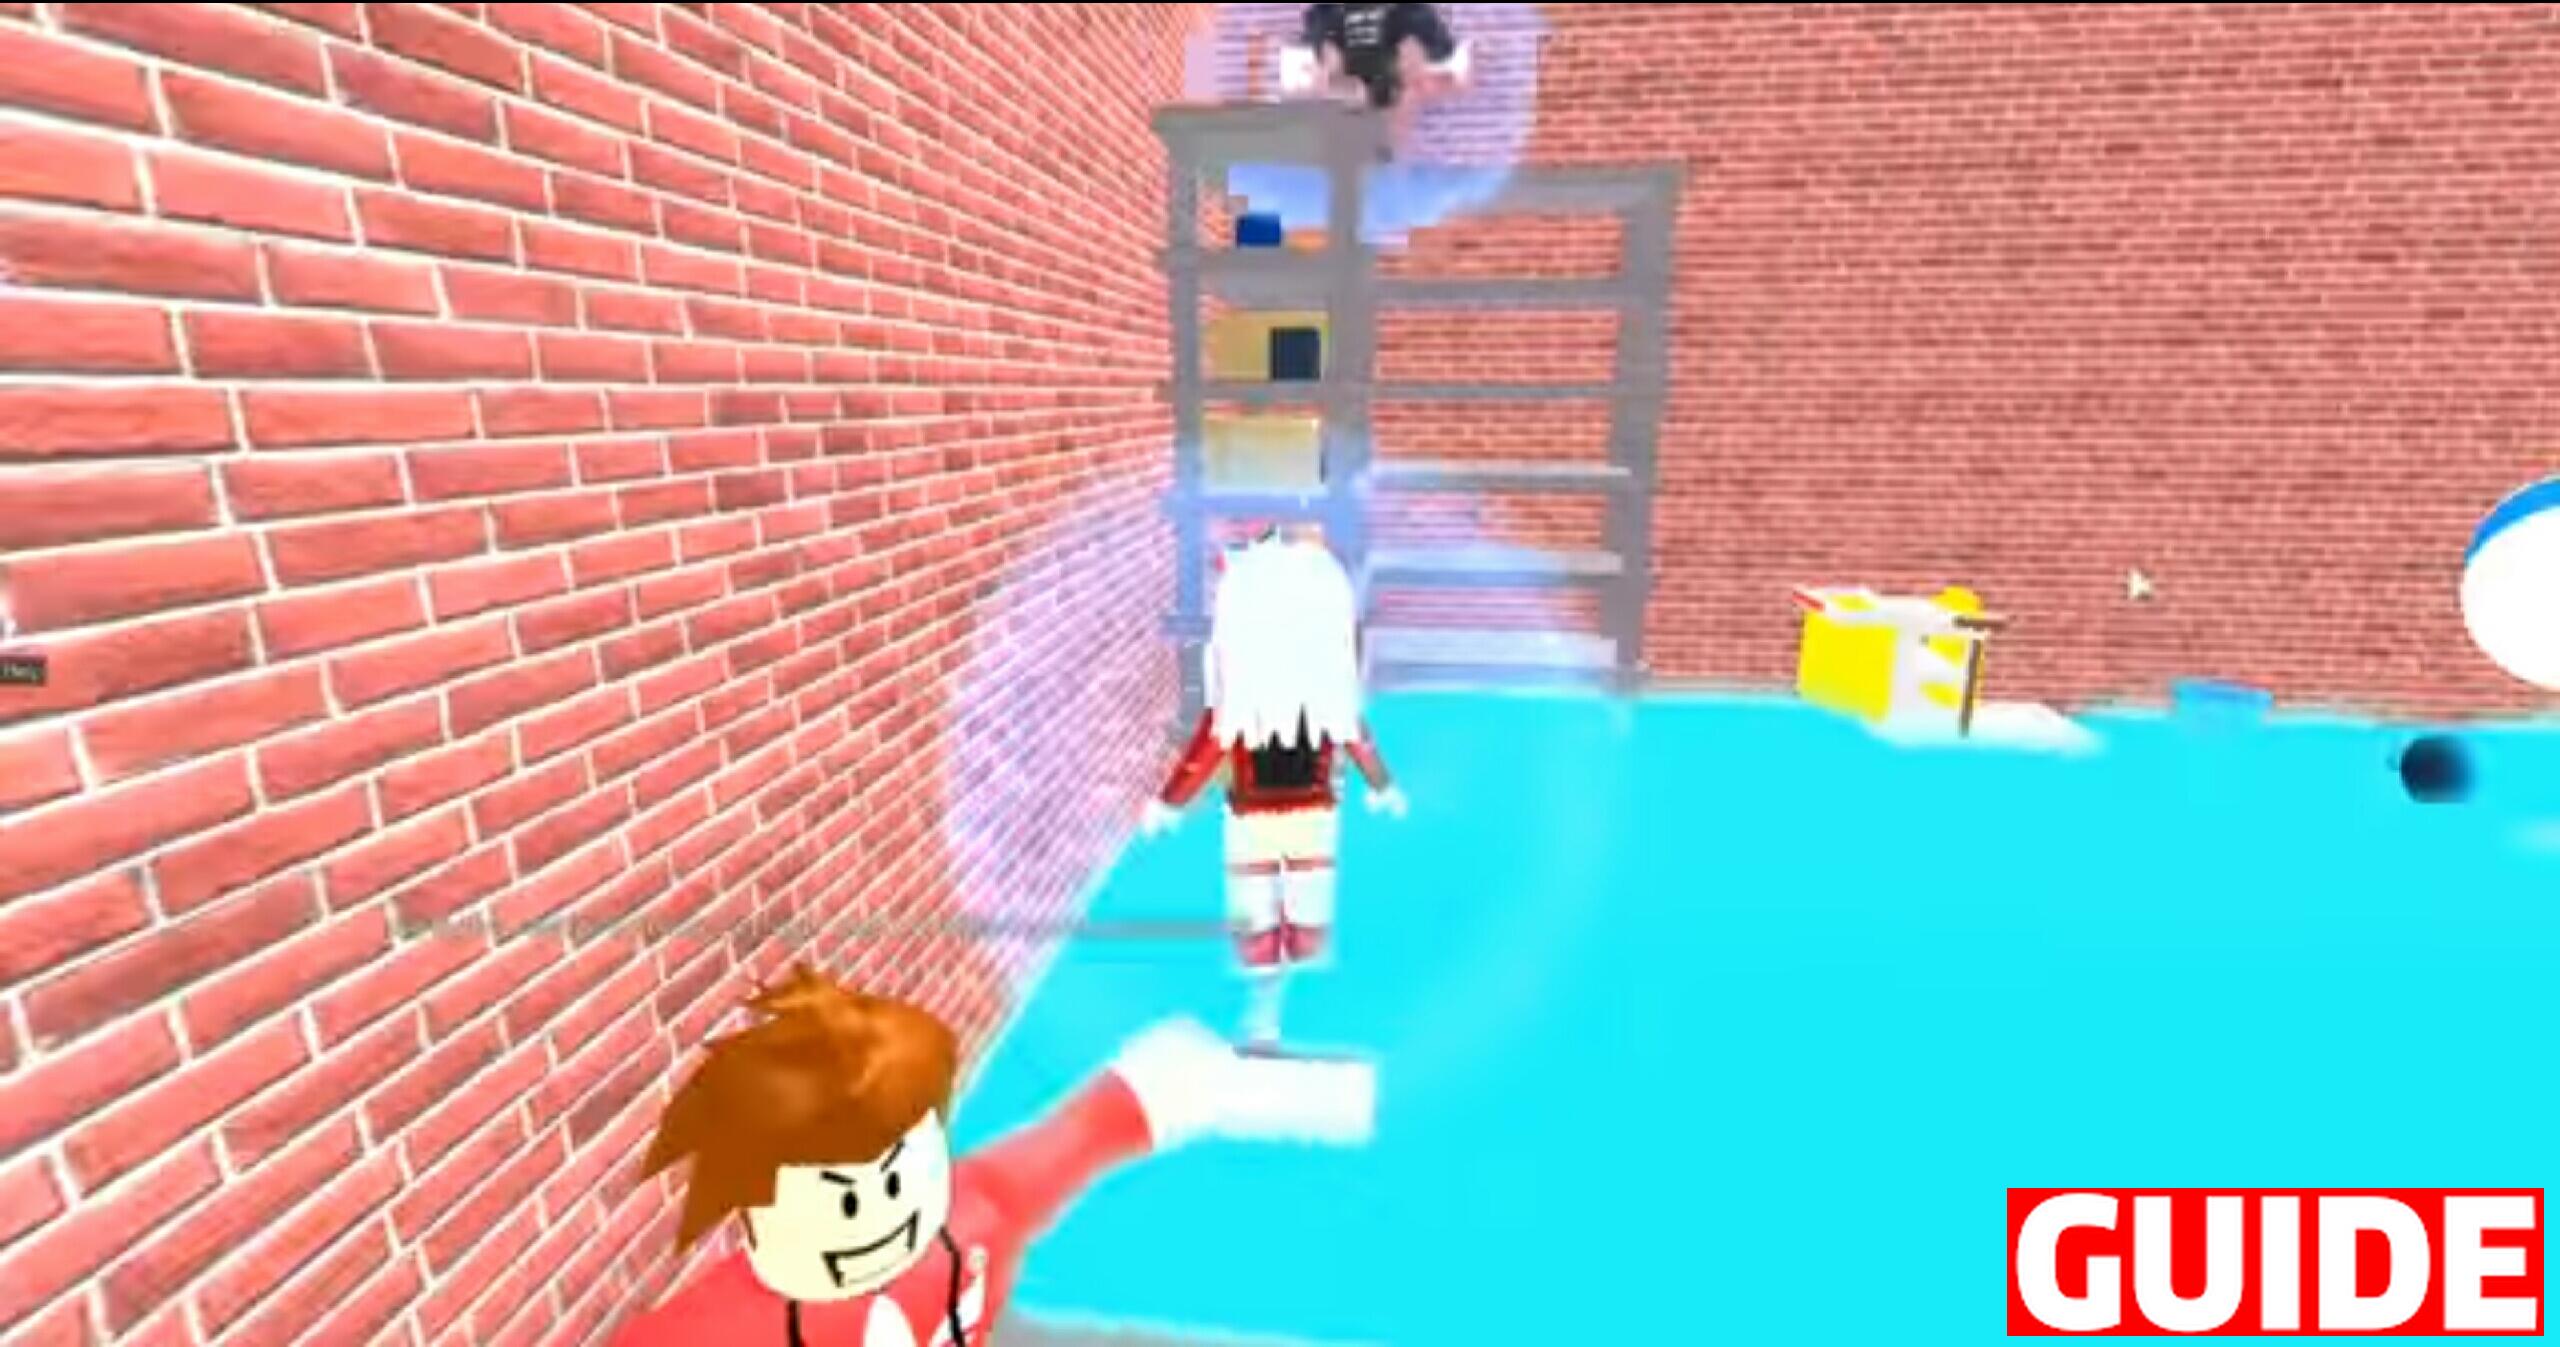 Guide Roblox Escape School Obby For Android Apk Download - played escape the school obby roblox amino